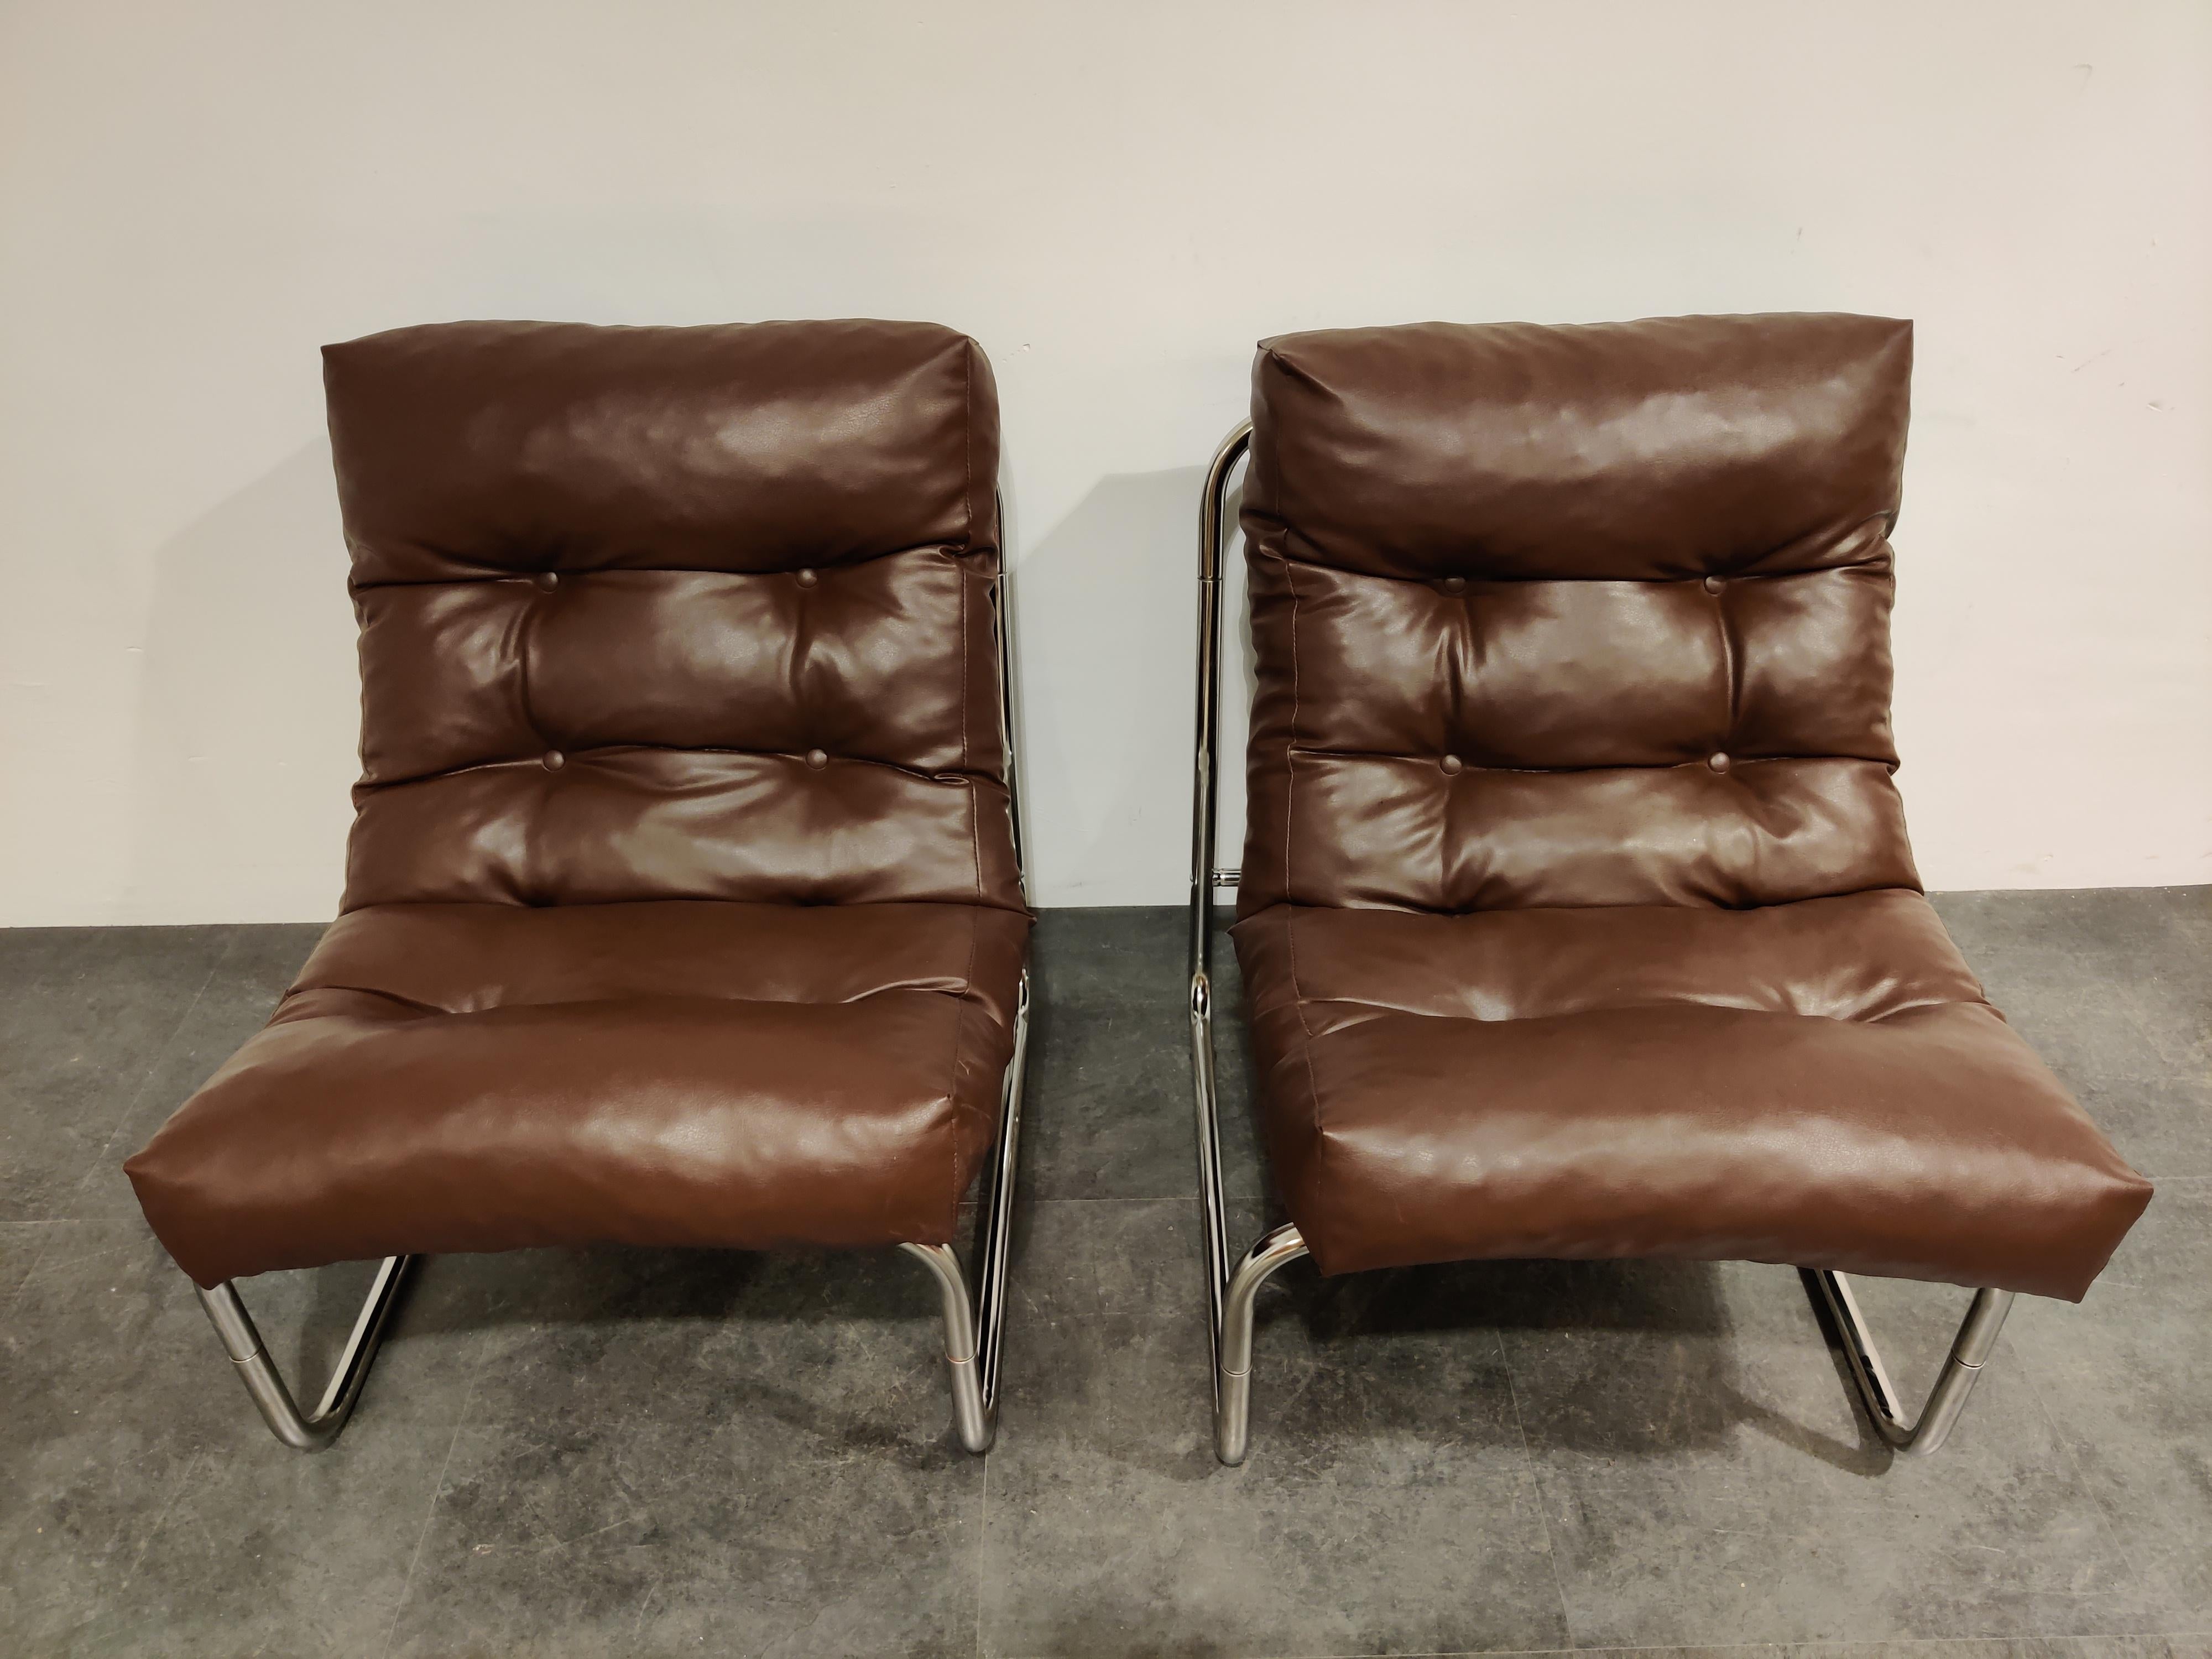 Vintage lounge chairs by famous Ikea designer Gillis Lundgren.

Made of a tubular steel frame with brown faux leather upholstery. 

Very comfortable.

Perfect condition.

1970s, Sweden

Dimensions:
Height 80cm/31.49